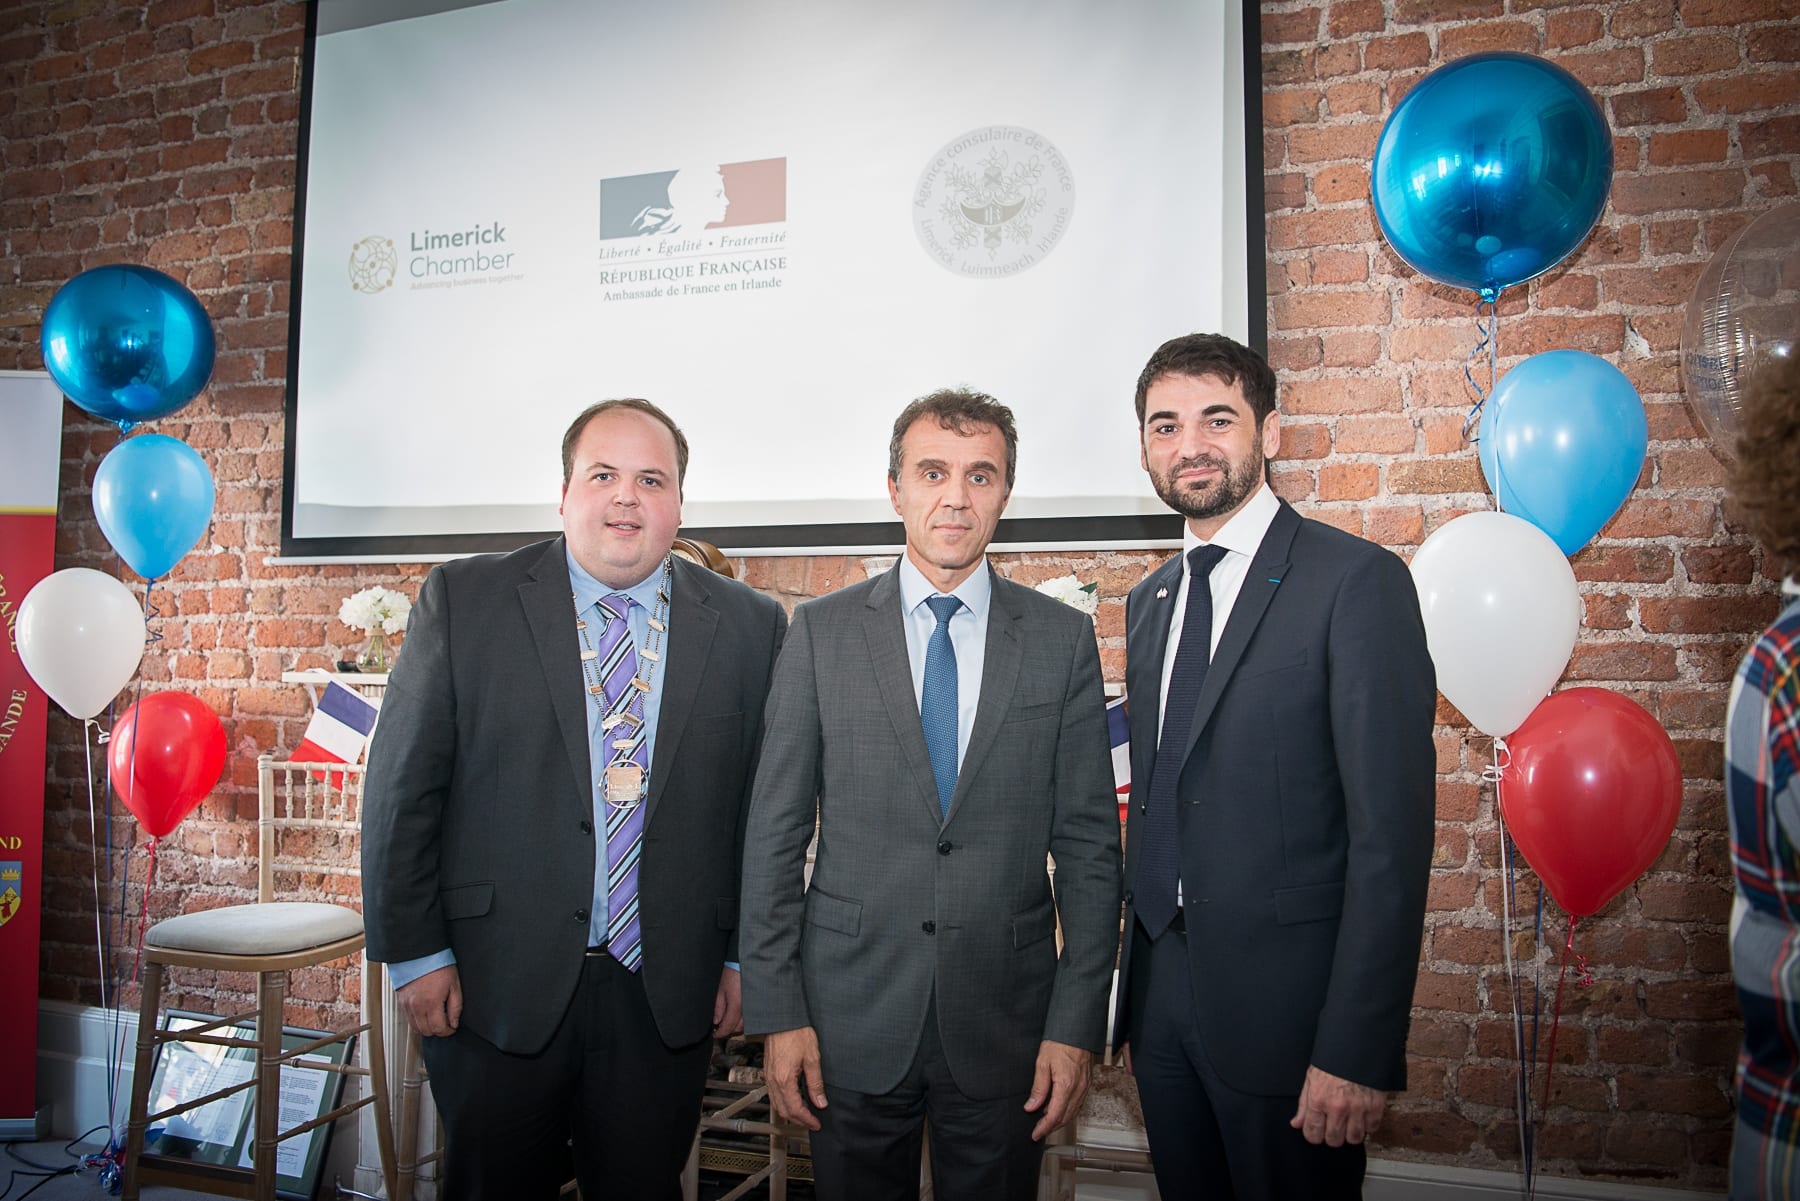 no repro fee- 
From Left to Right:  French Embassy Event which took place on the 18th June in the Limerick Chamber Boardroom:  Deputy Mayor Adam Teskey, HE Stéphane Crouzat - French Embassy,  Dr Loic Guyon - French Embassy 
Photo by Morning Star Photography